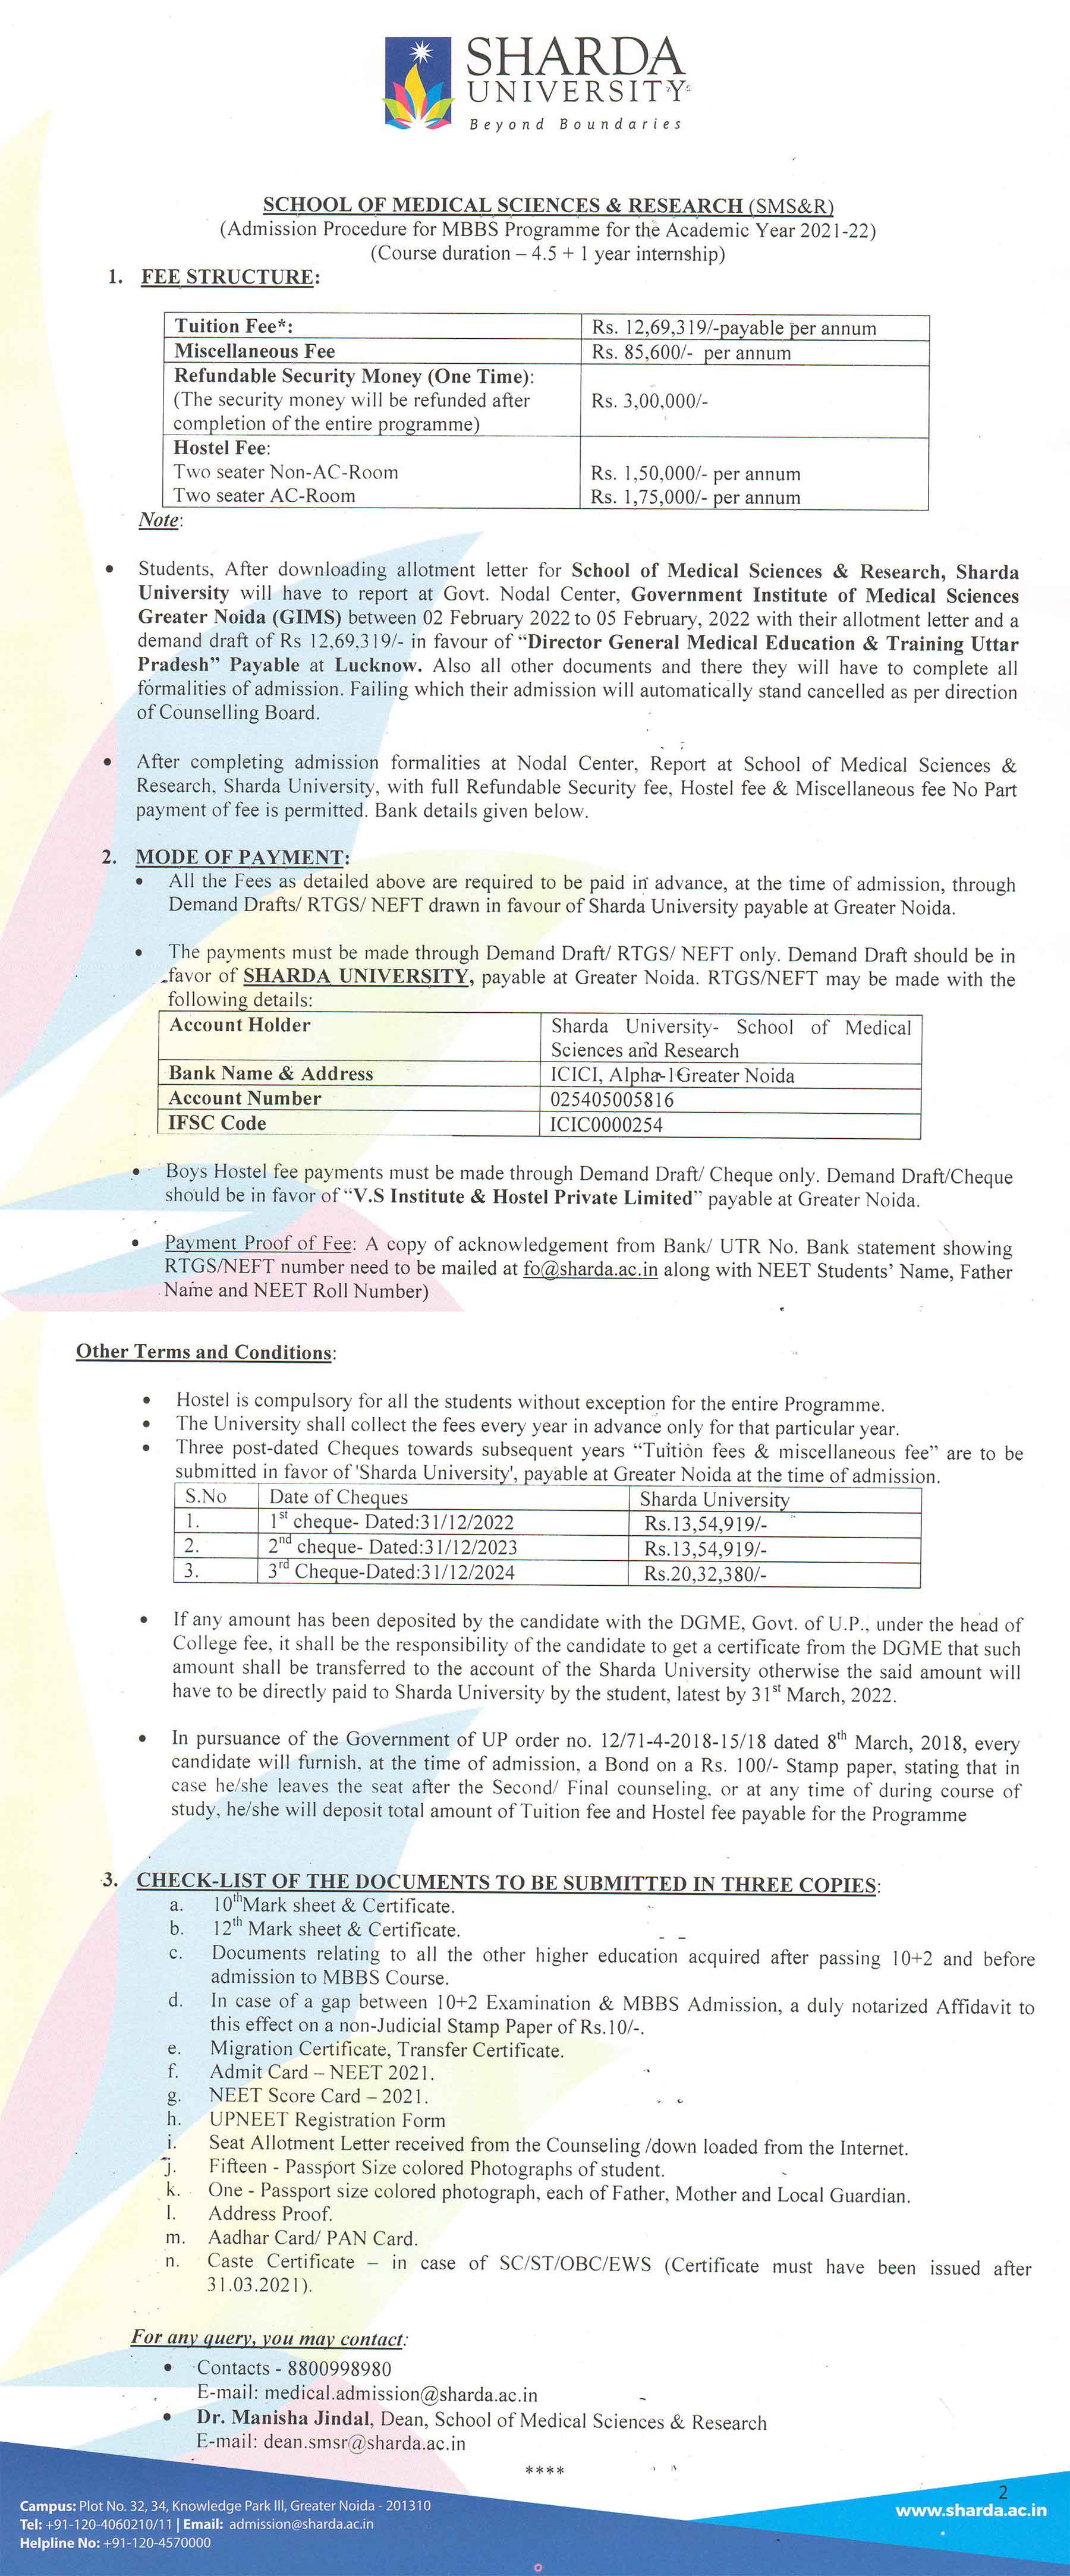 Fee Structure & Admission Procedure of BDS Program